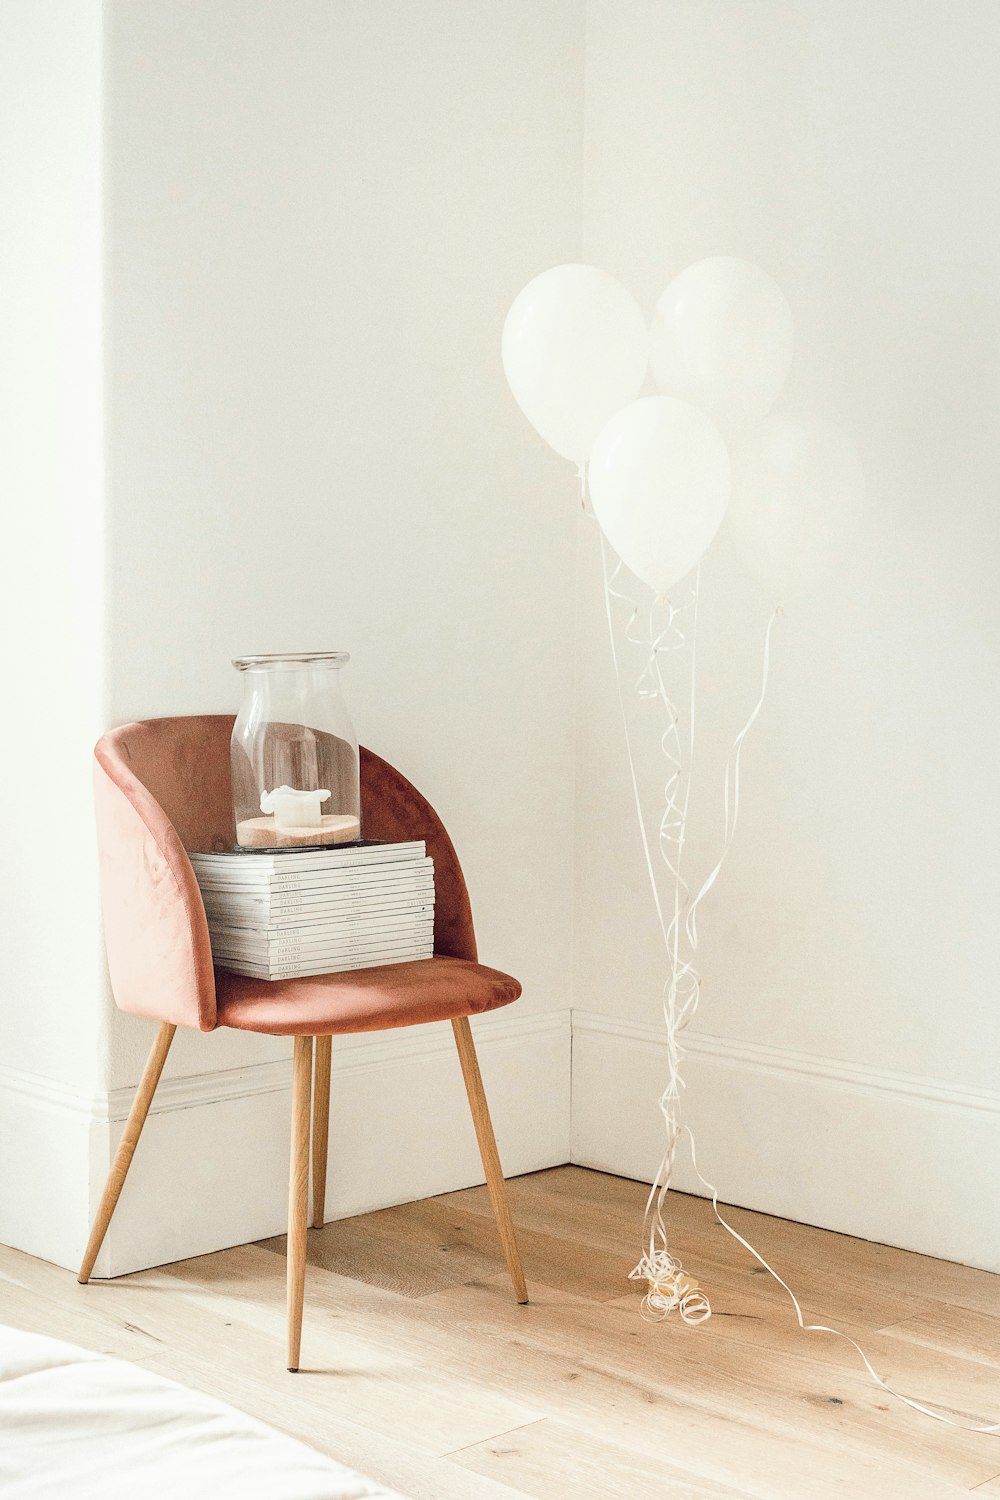 white balloons beside jar on book and chair